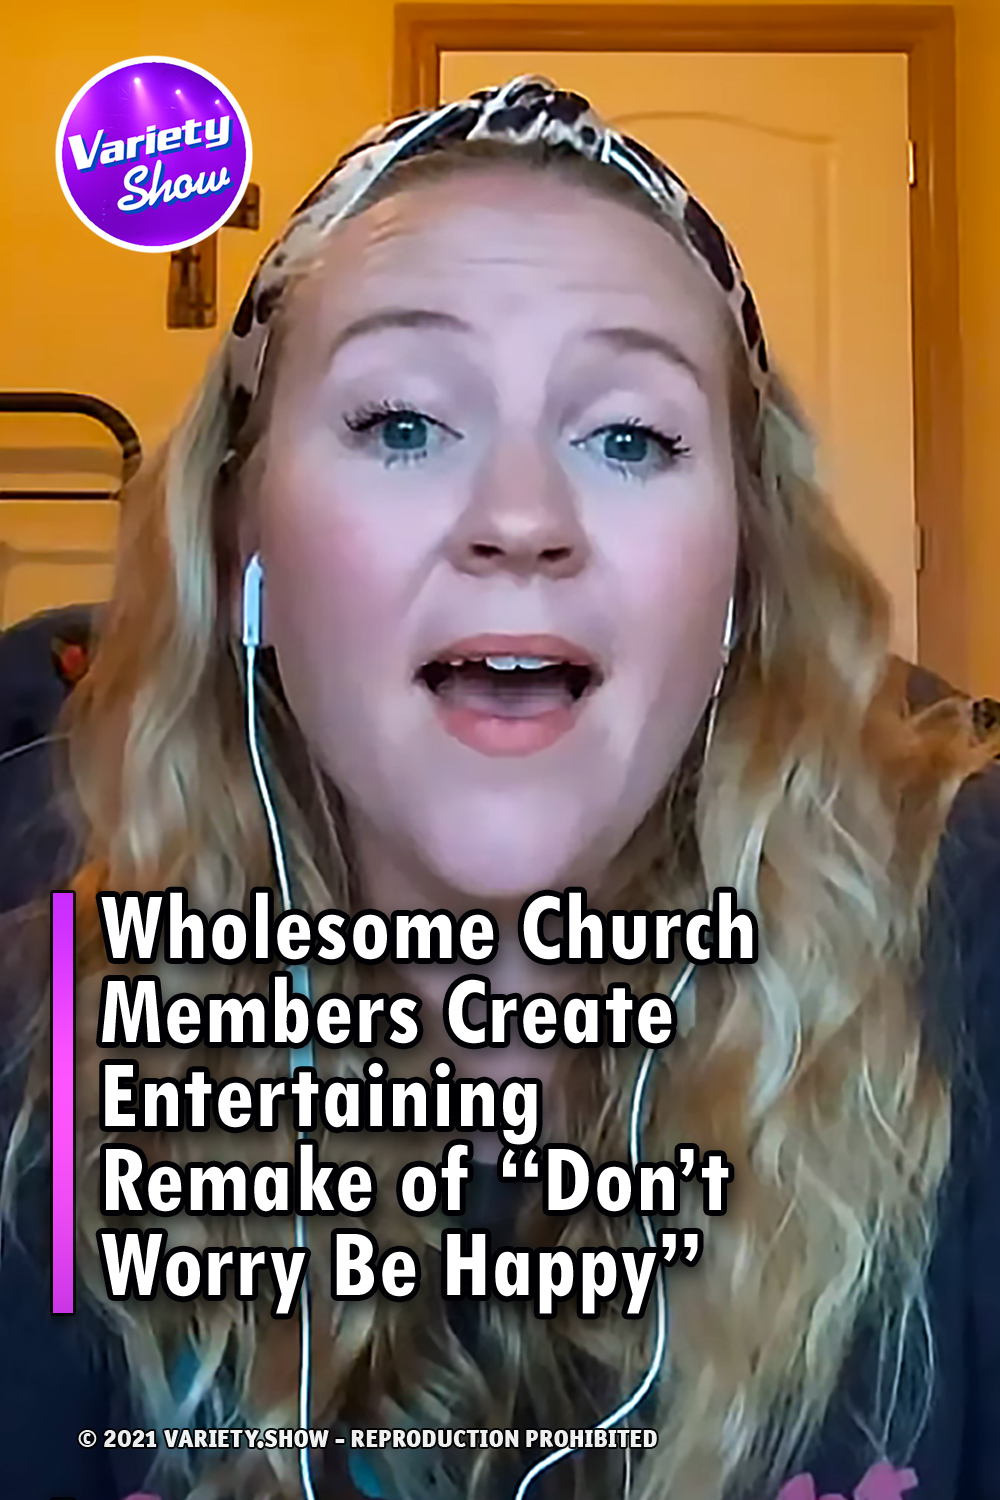 Wholesome Church Members Create Entertaining Remake of “Don’t Worry Be Happy”